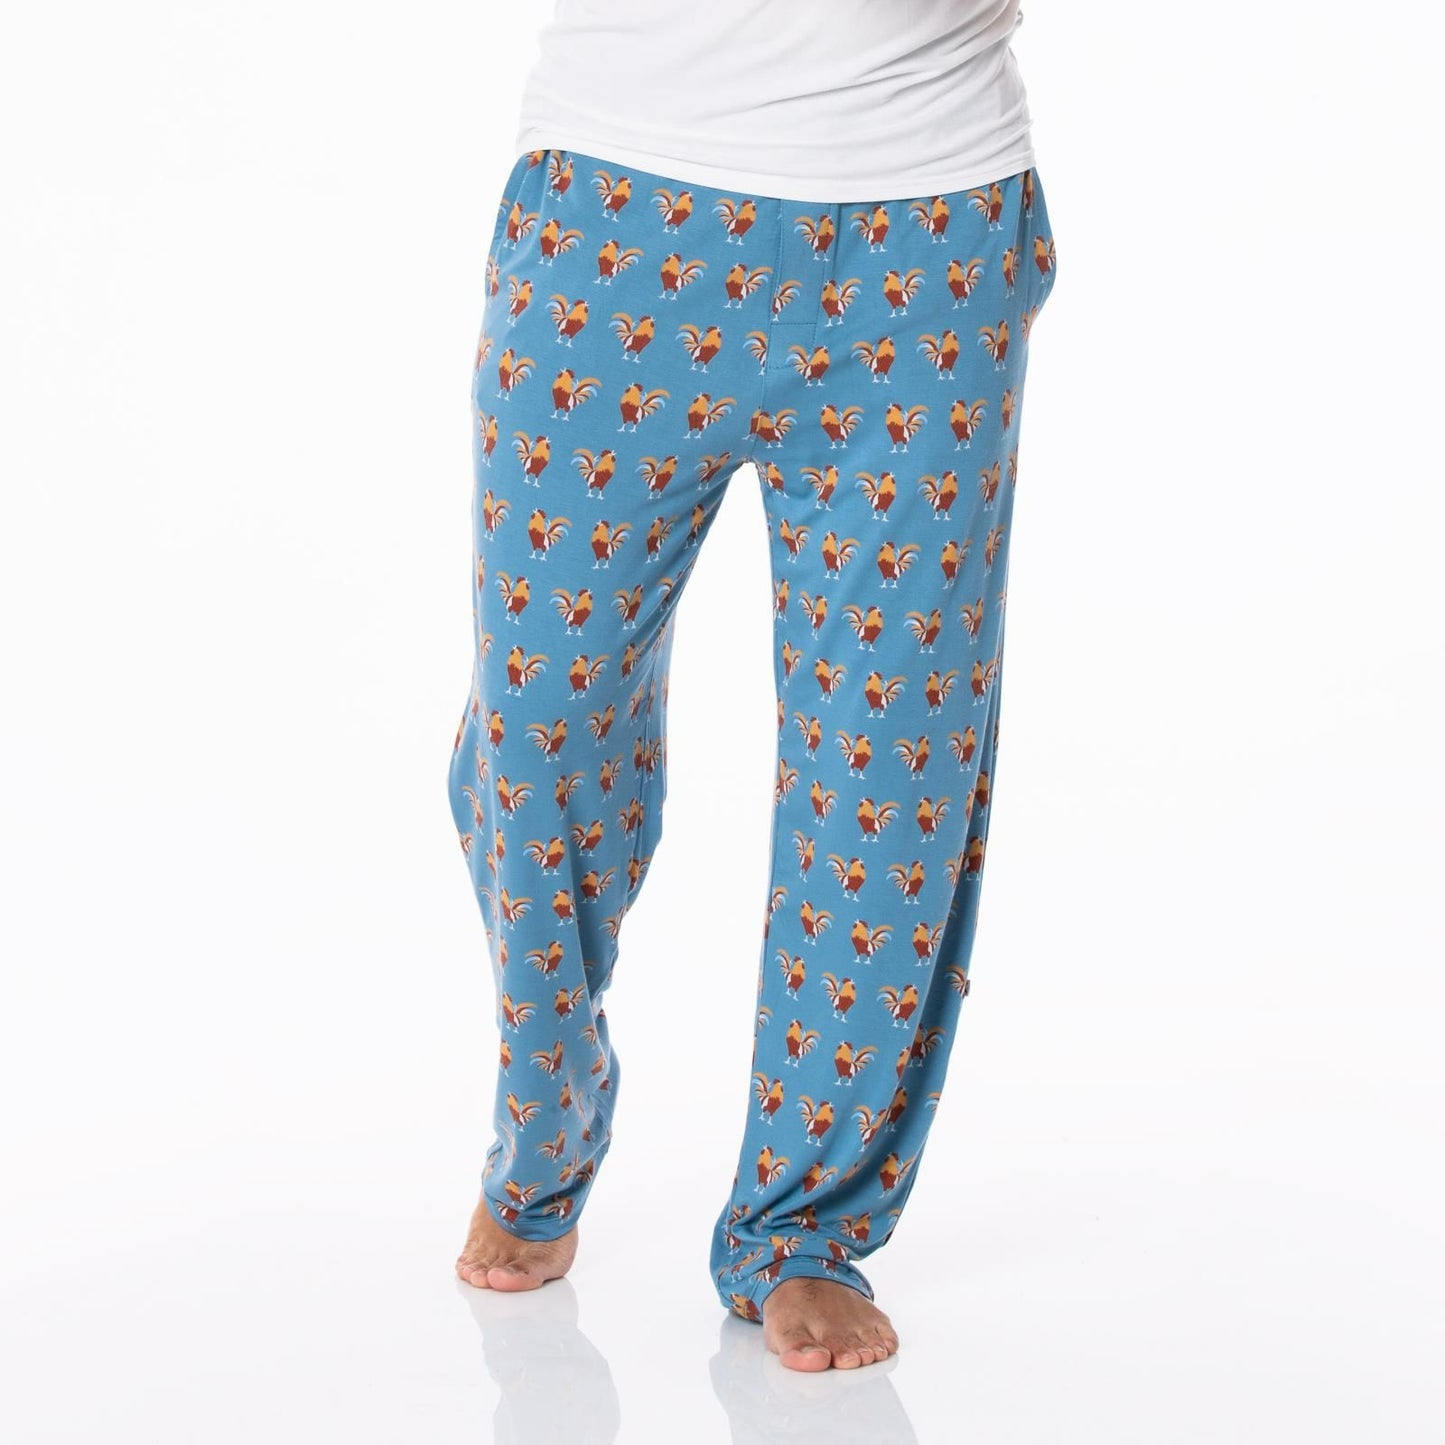 Last One - Size Small: Men's Pajama Pants - Parisian Rooster